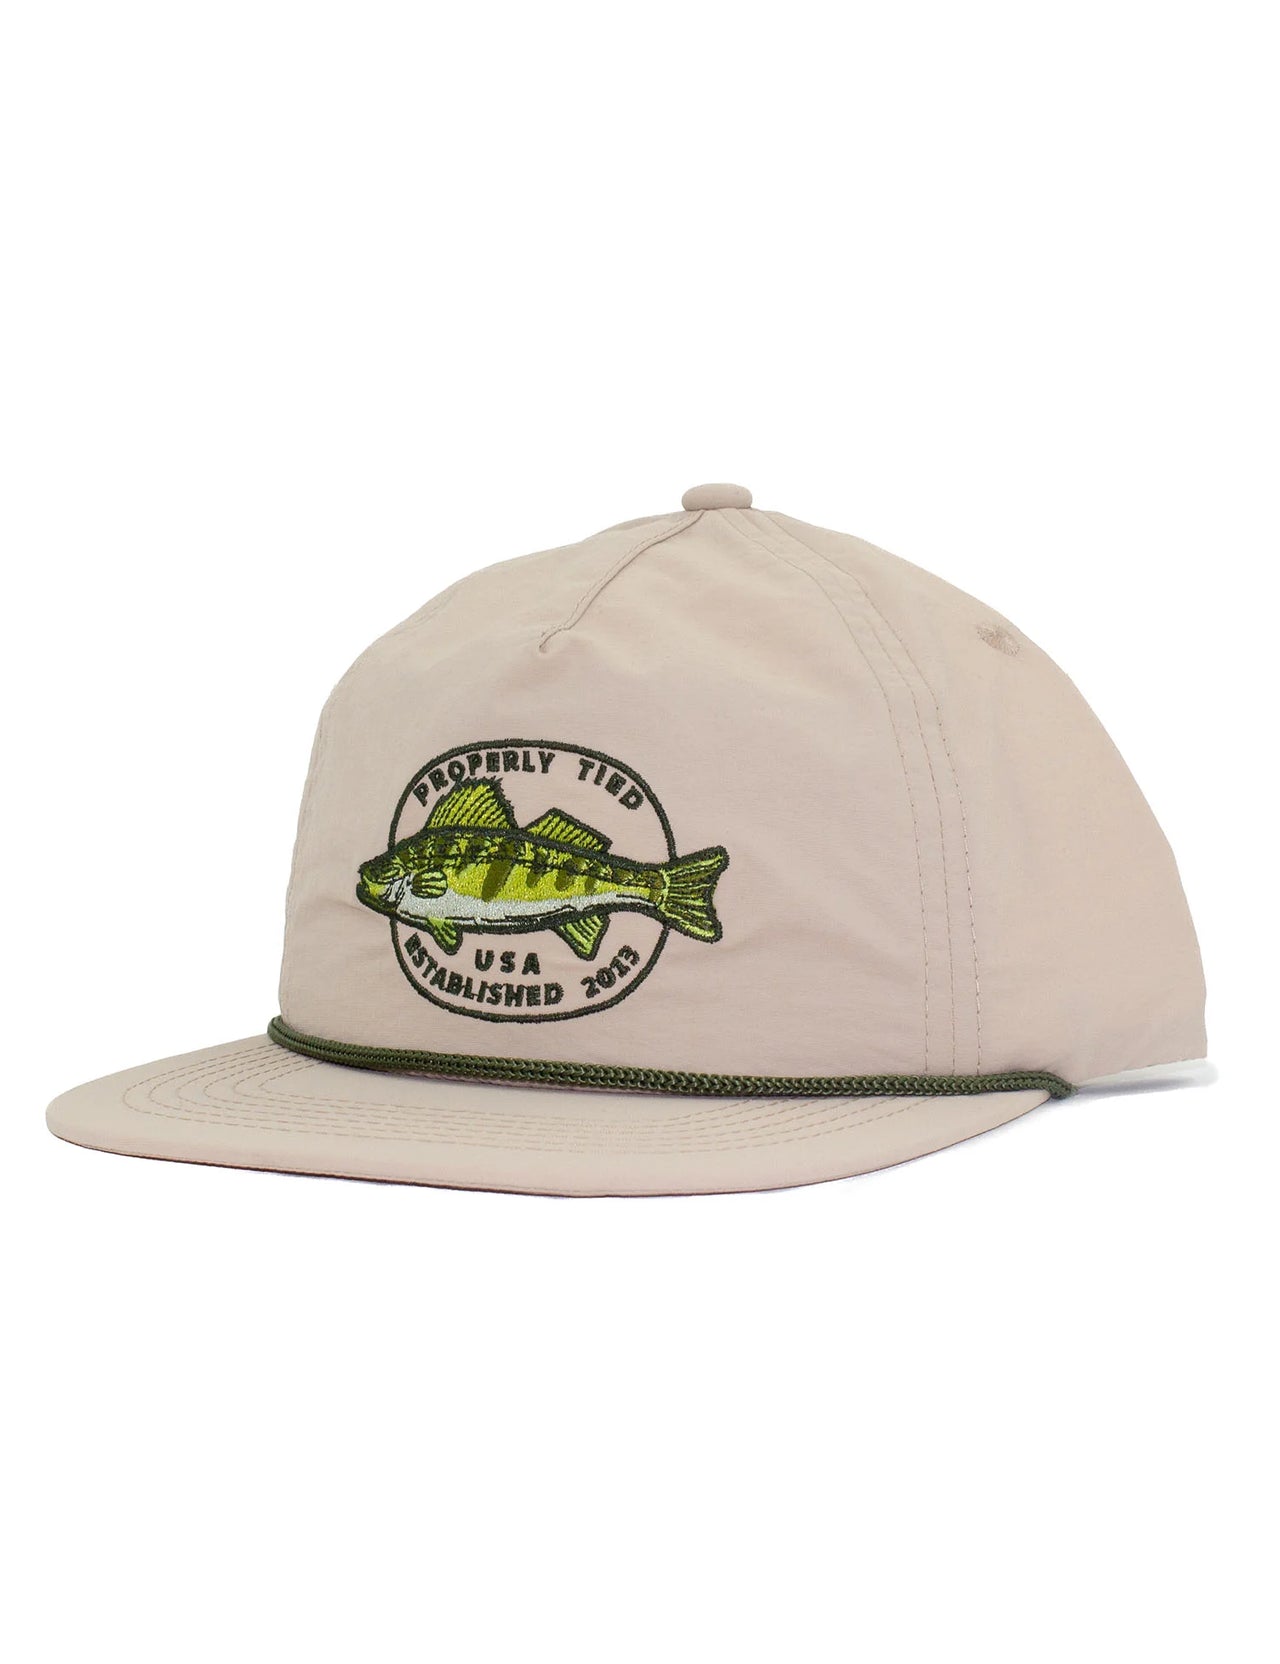 Youth - Boys Hooked Rope Cap